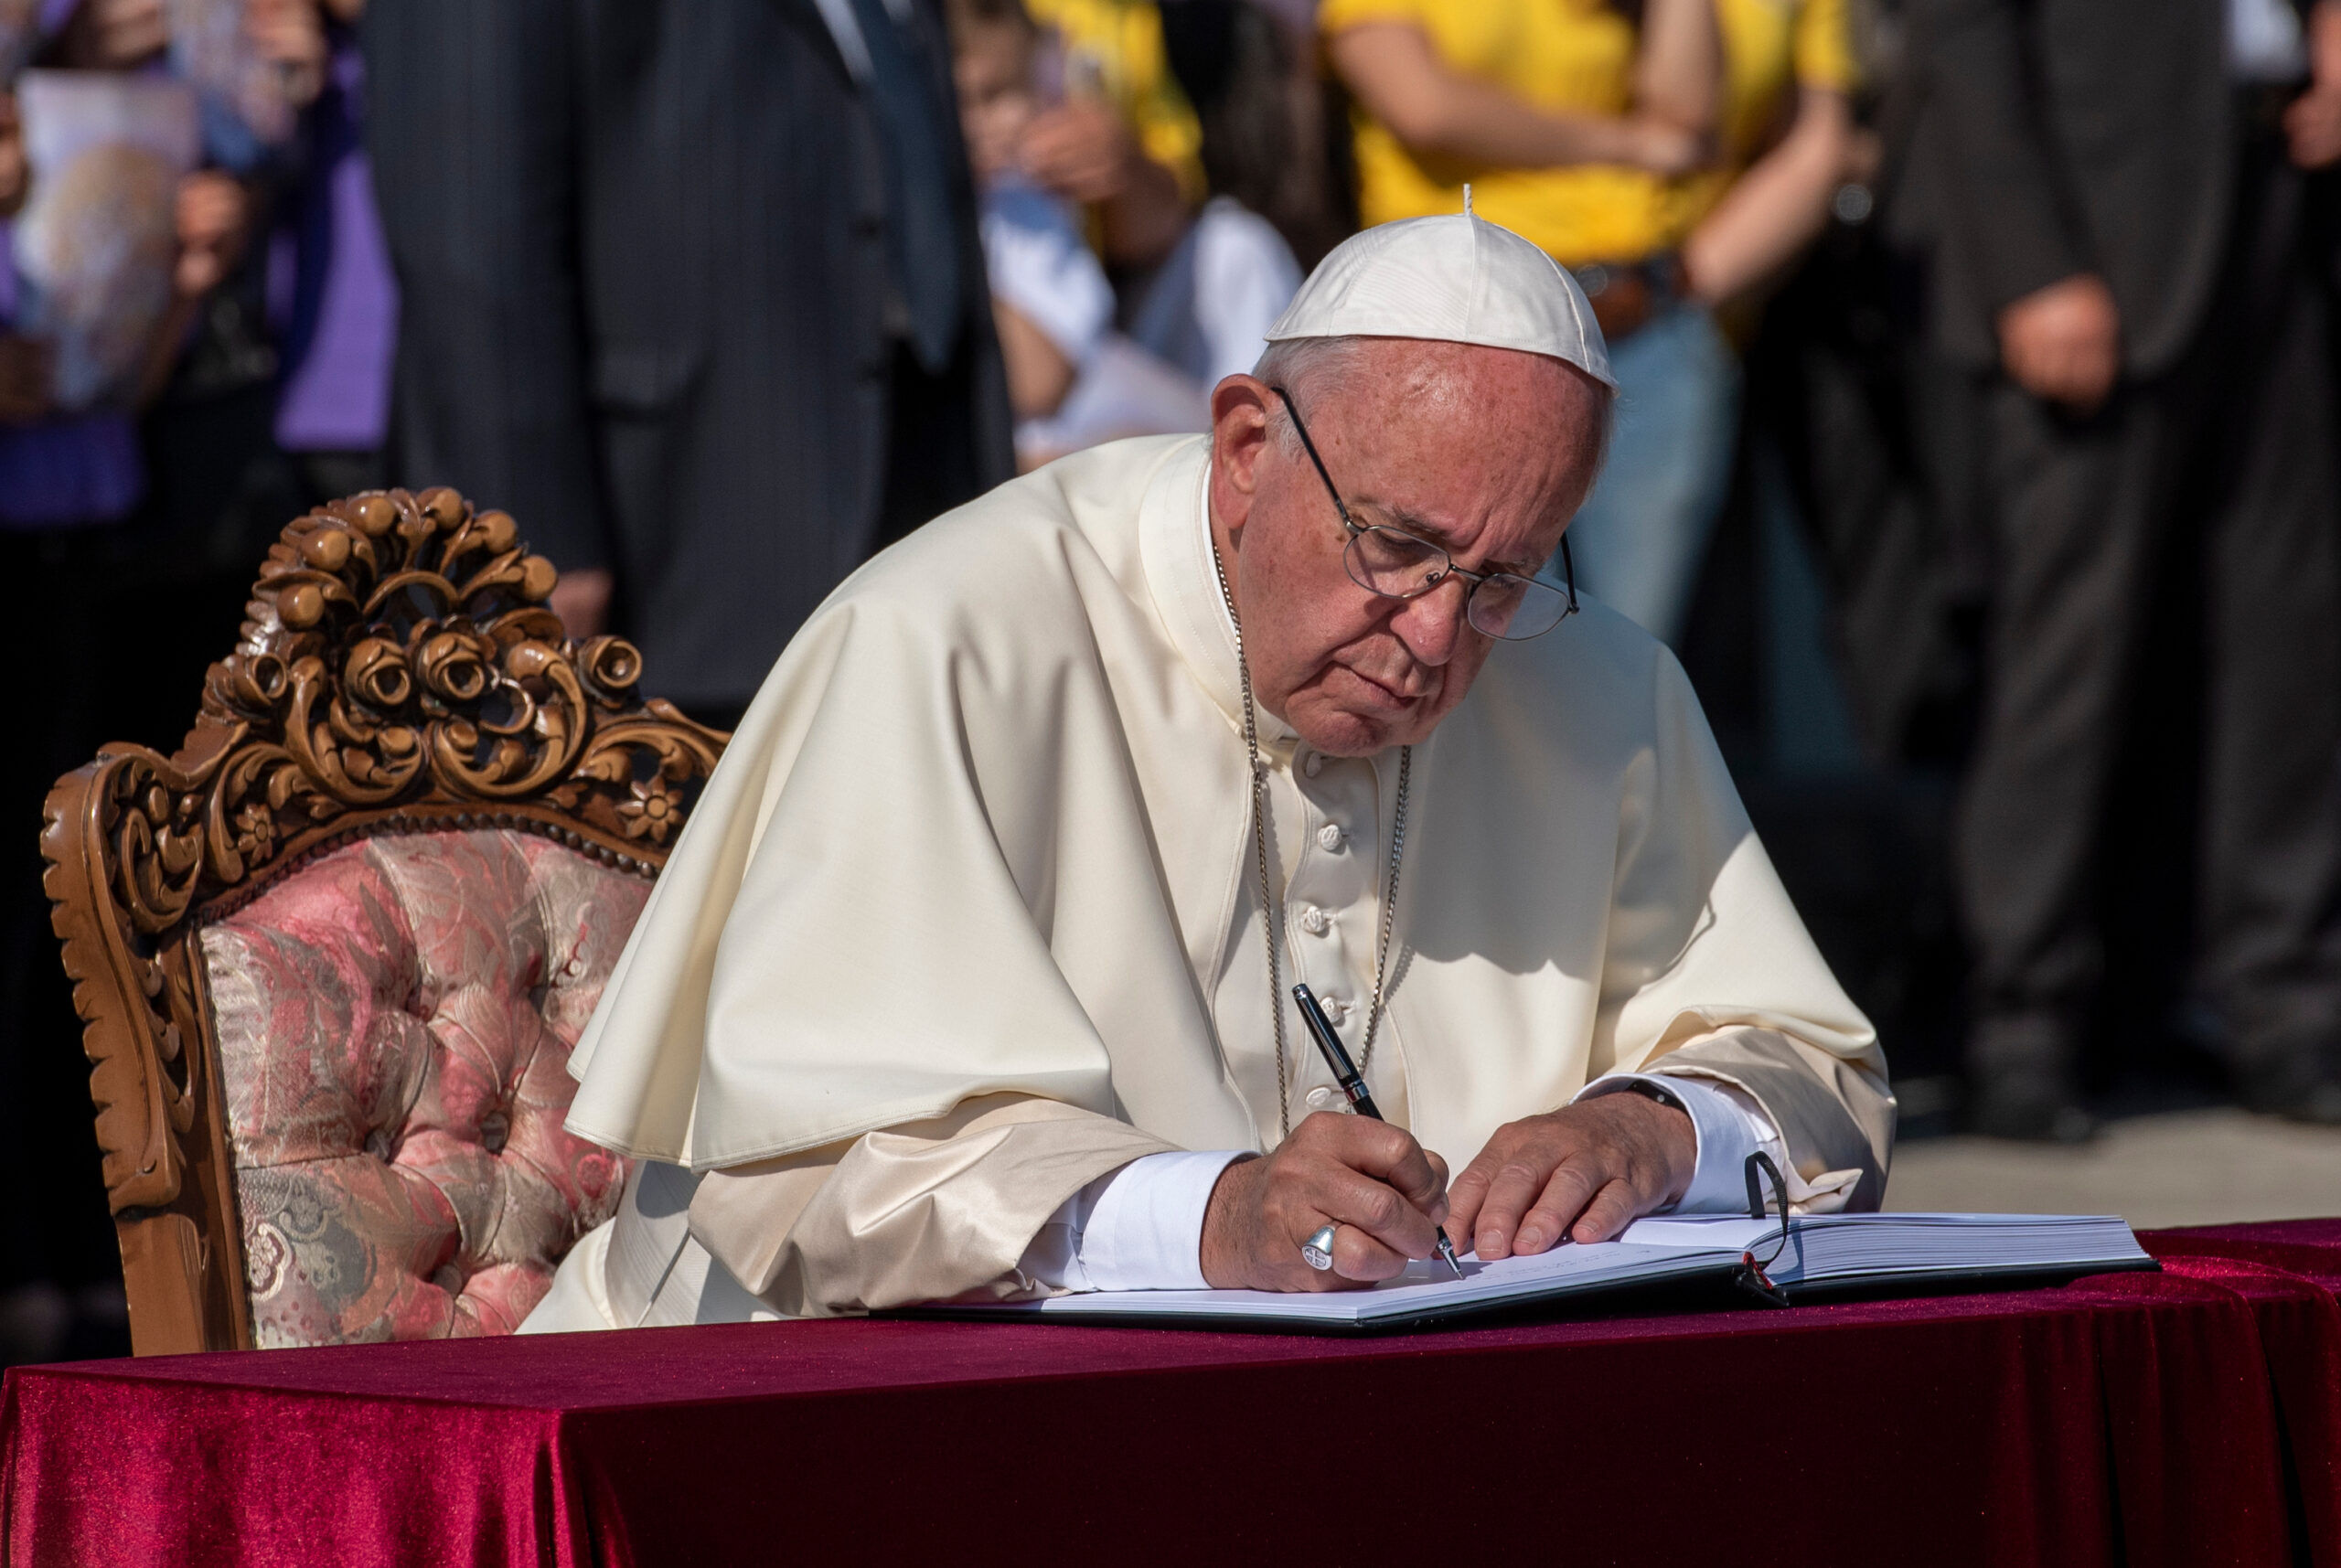 YEREVAN, ARMENIA - JUNE 25, 2016 Pope Francis writes a note in the Honorable Visitors' Book, during his visit to the Tsitsernakaberd Armenian Genocide Memoril